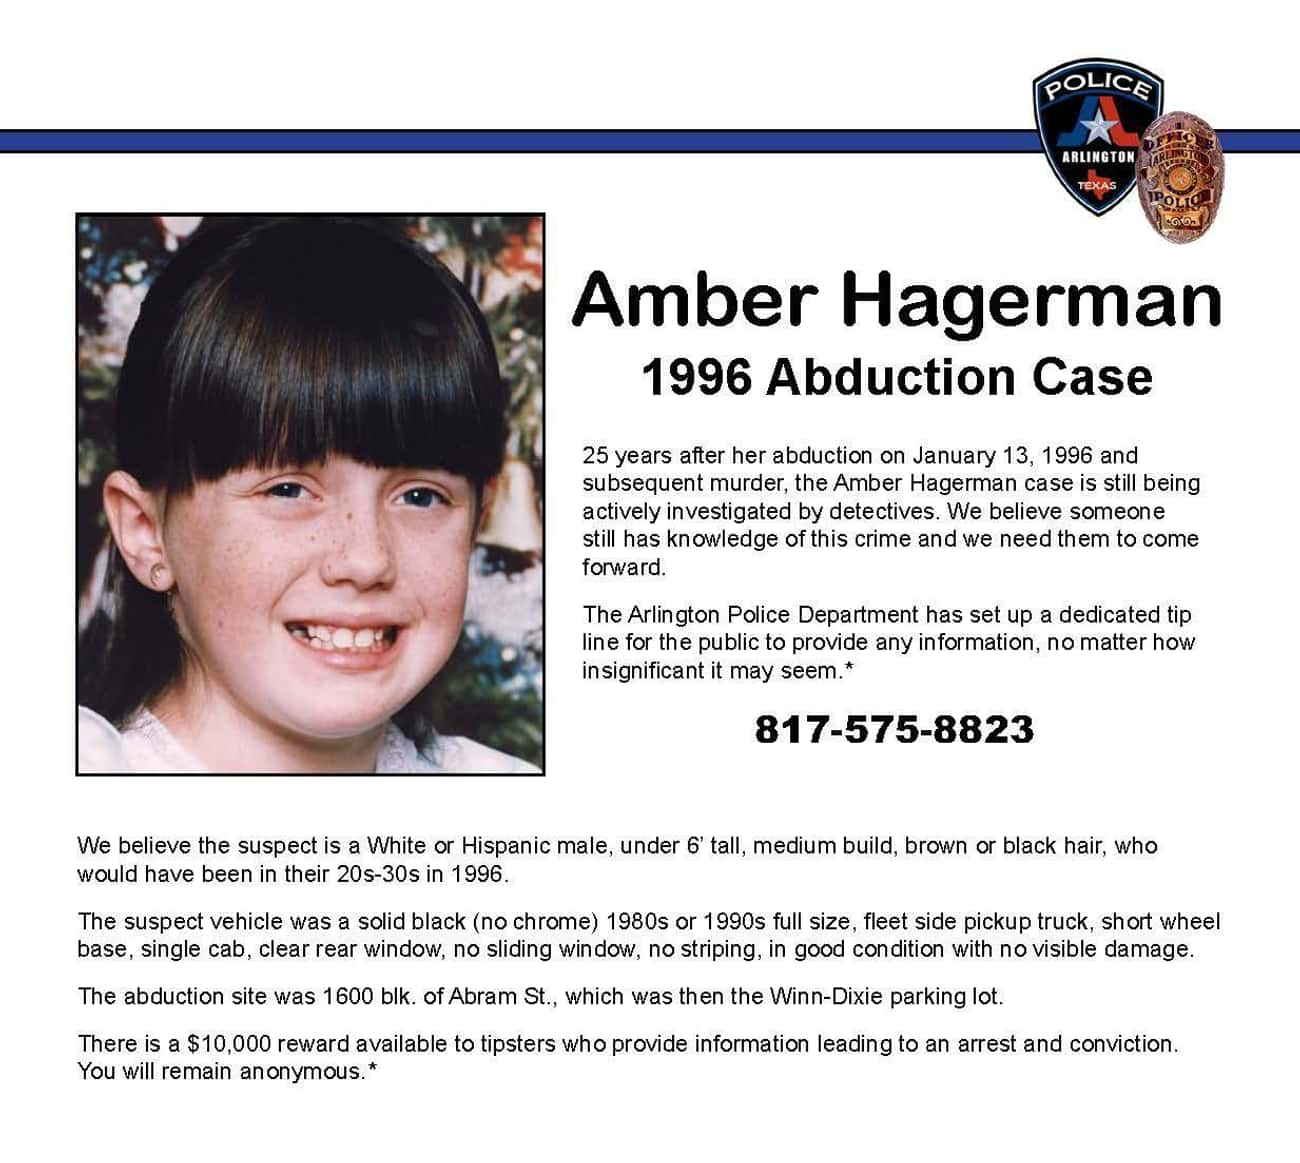 Who Abducted Amber Hagerman?